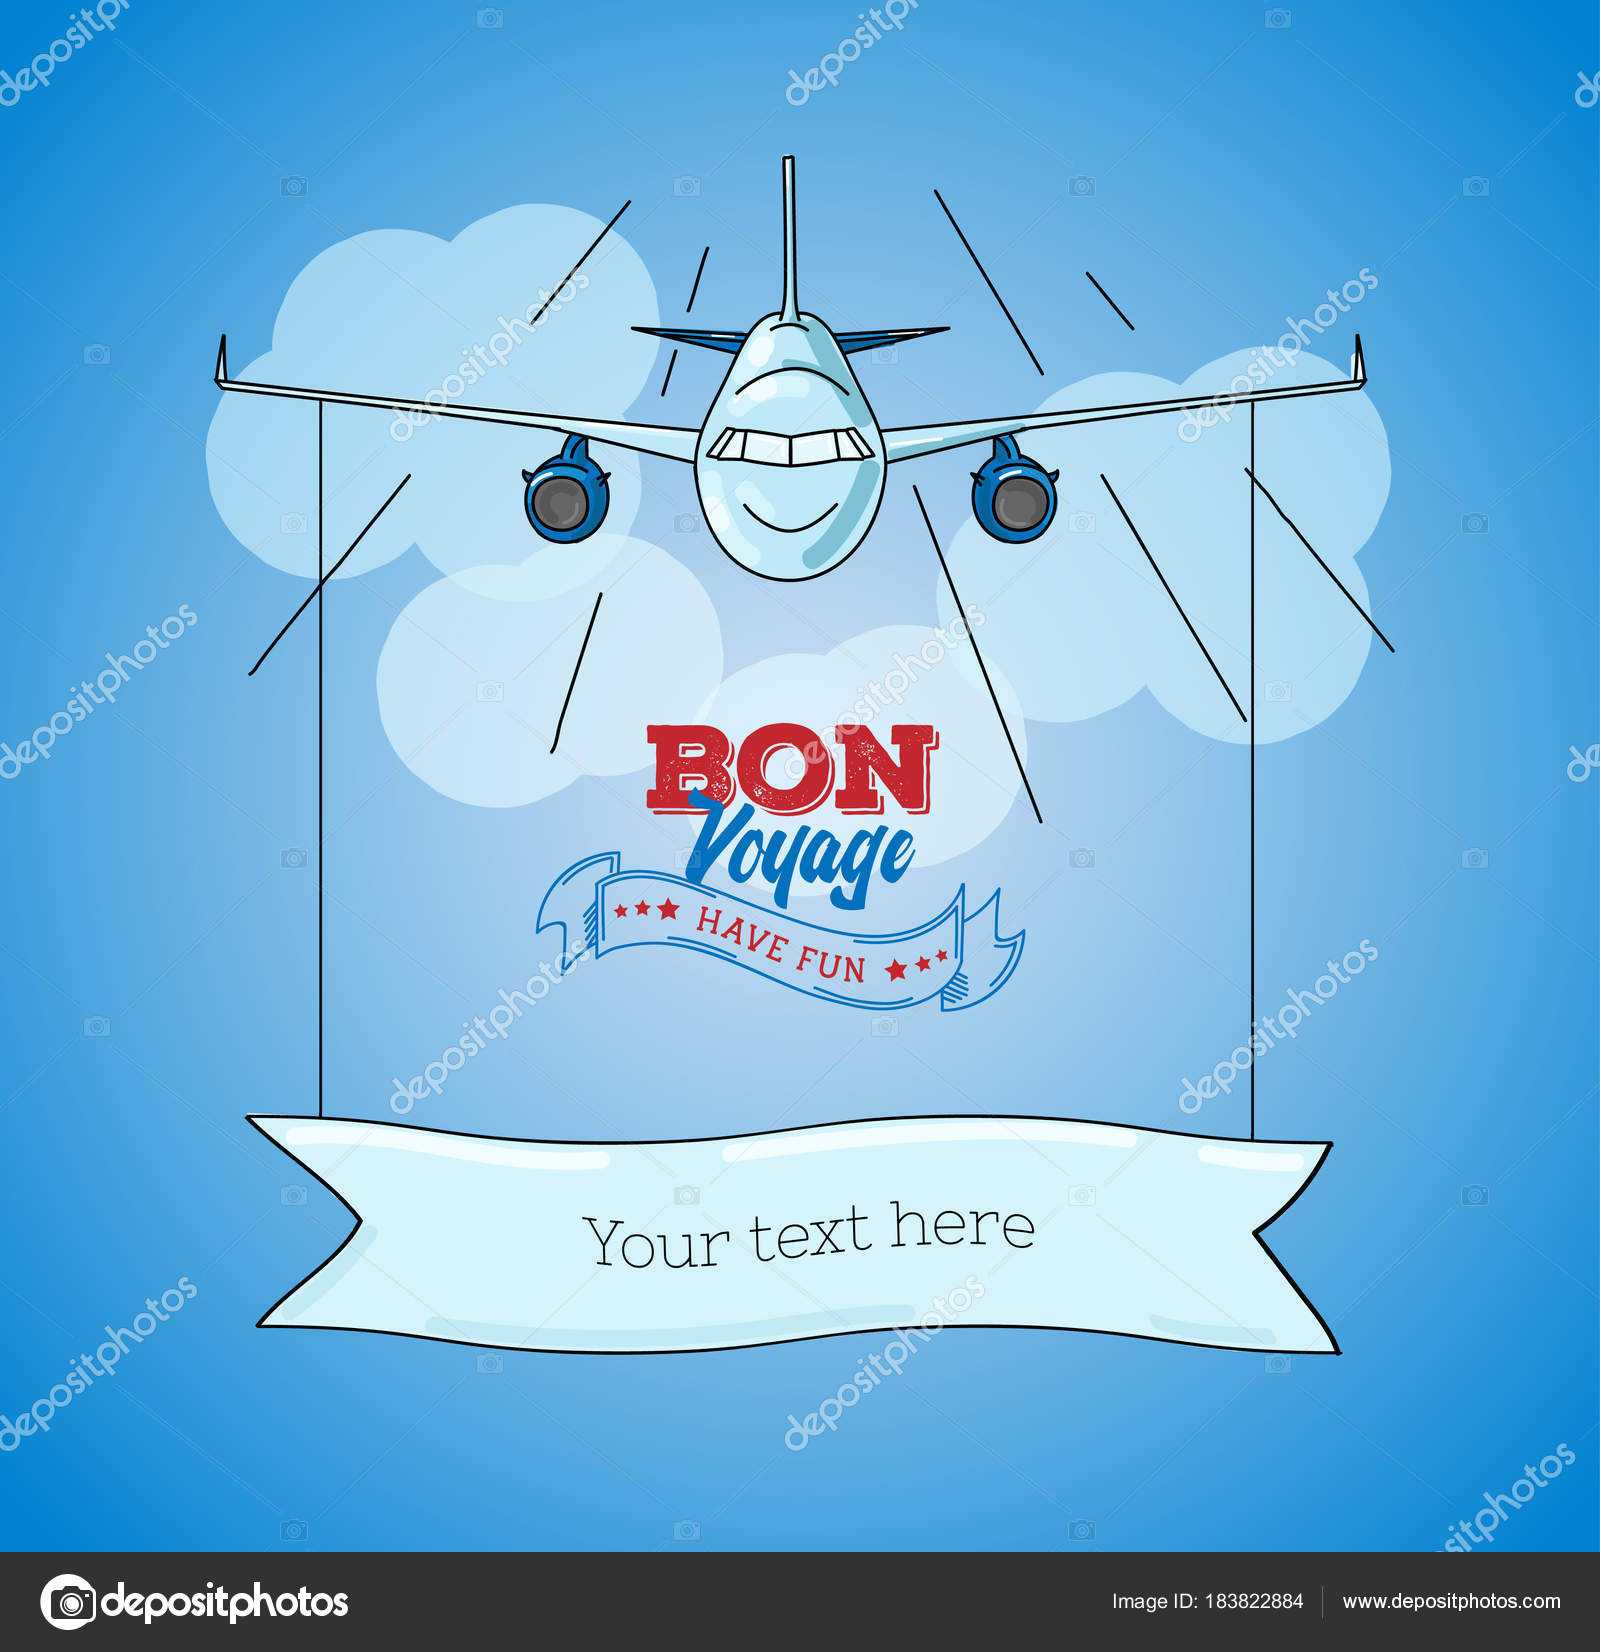 Card Template With Plane Graphic Illustration On Blue Sky Intended For Bon Voyage Card Template